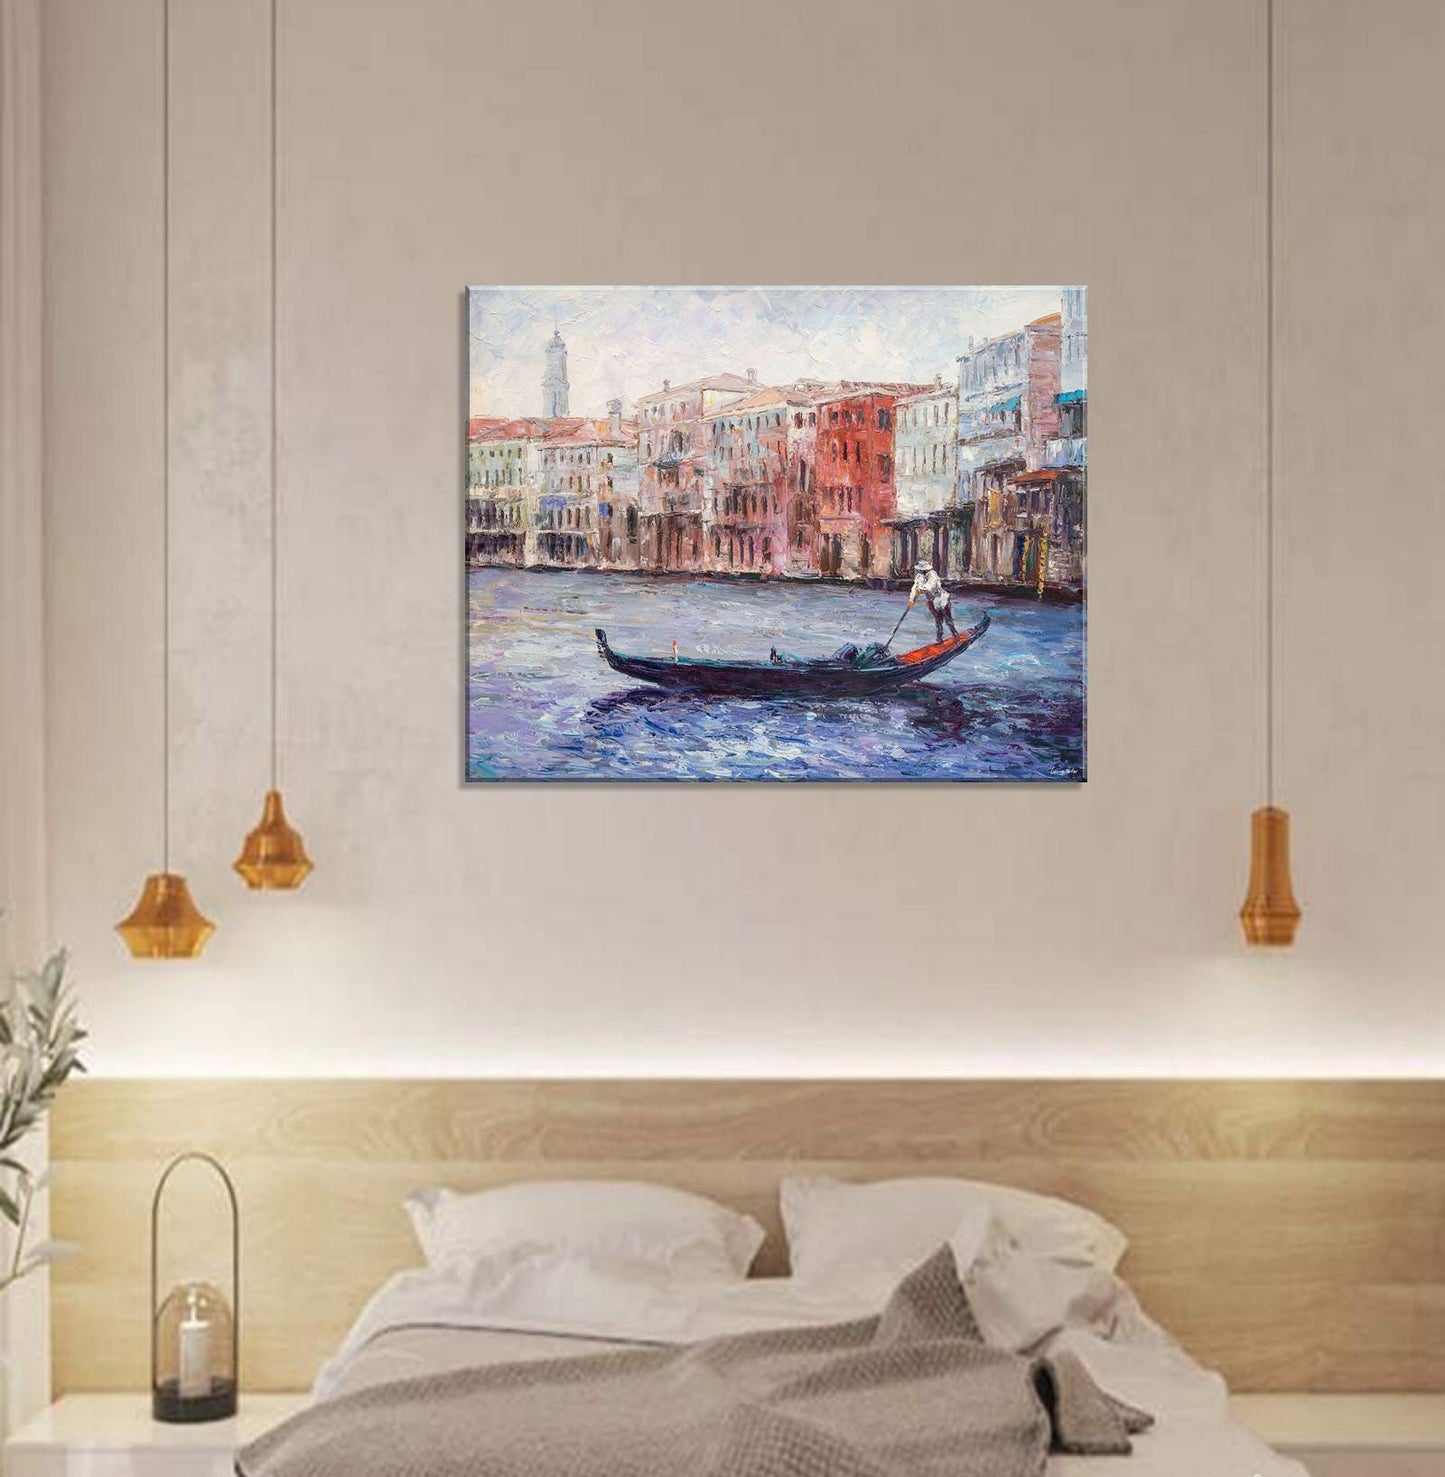 Oil Painting, Palette Knife Painting, Seascape, Venice Gondola Oil Painting, Original Abstract Art, Modern Painting, Large Wall Decor, Art